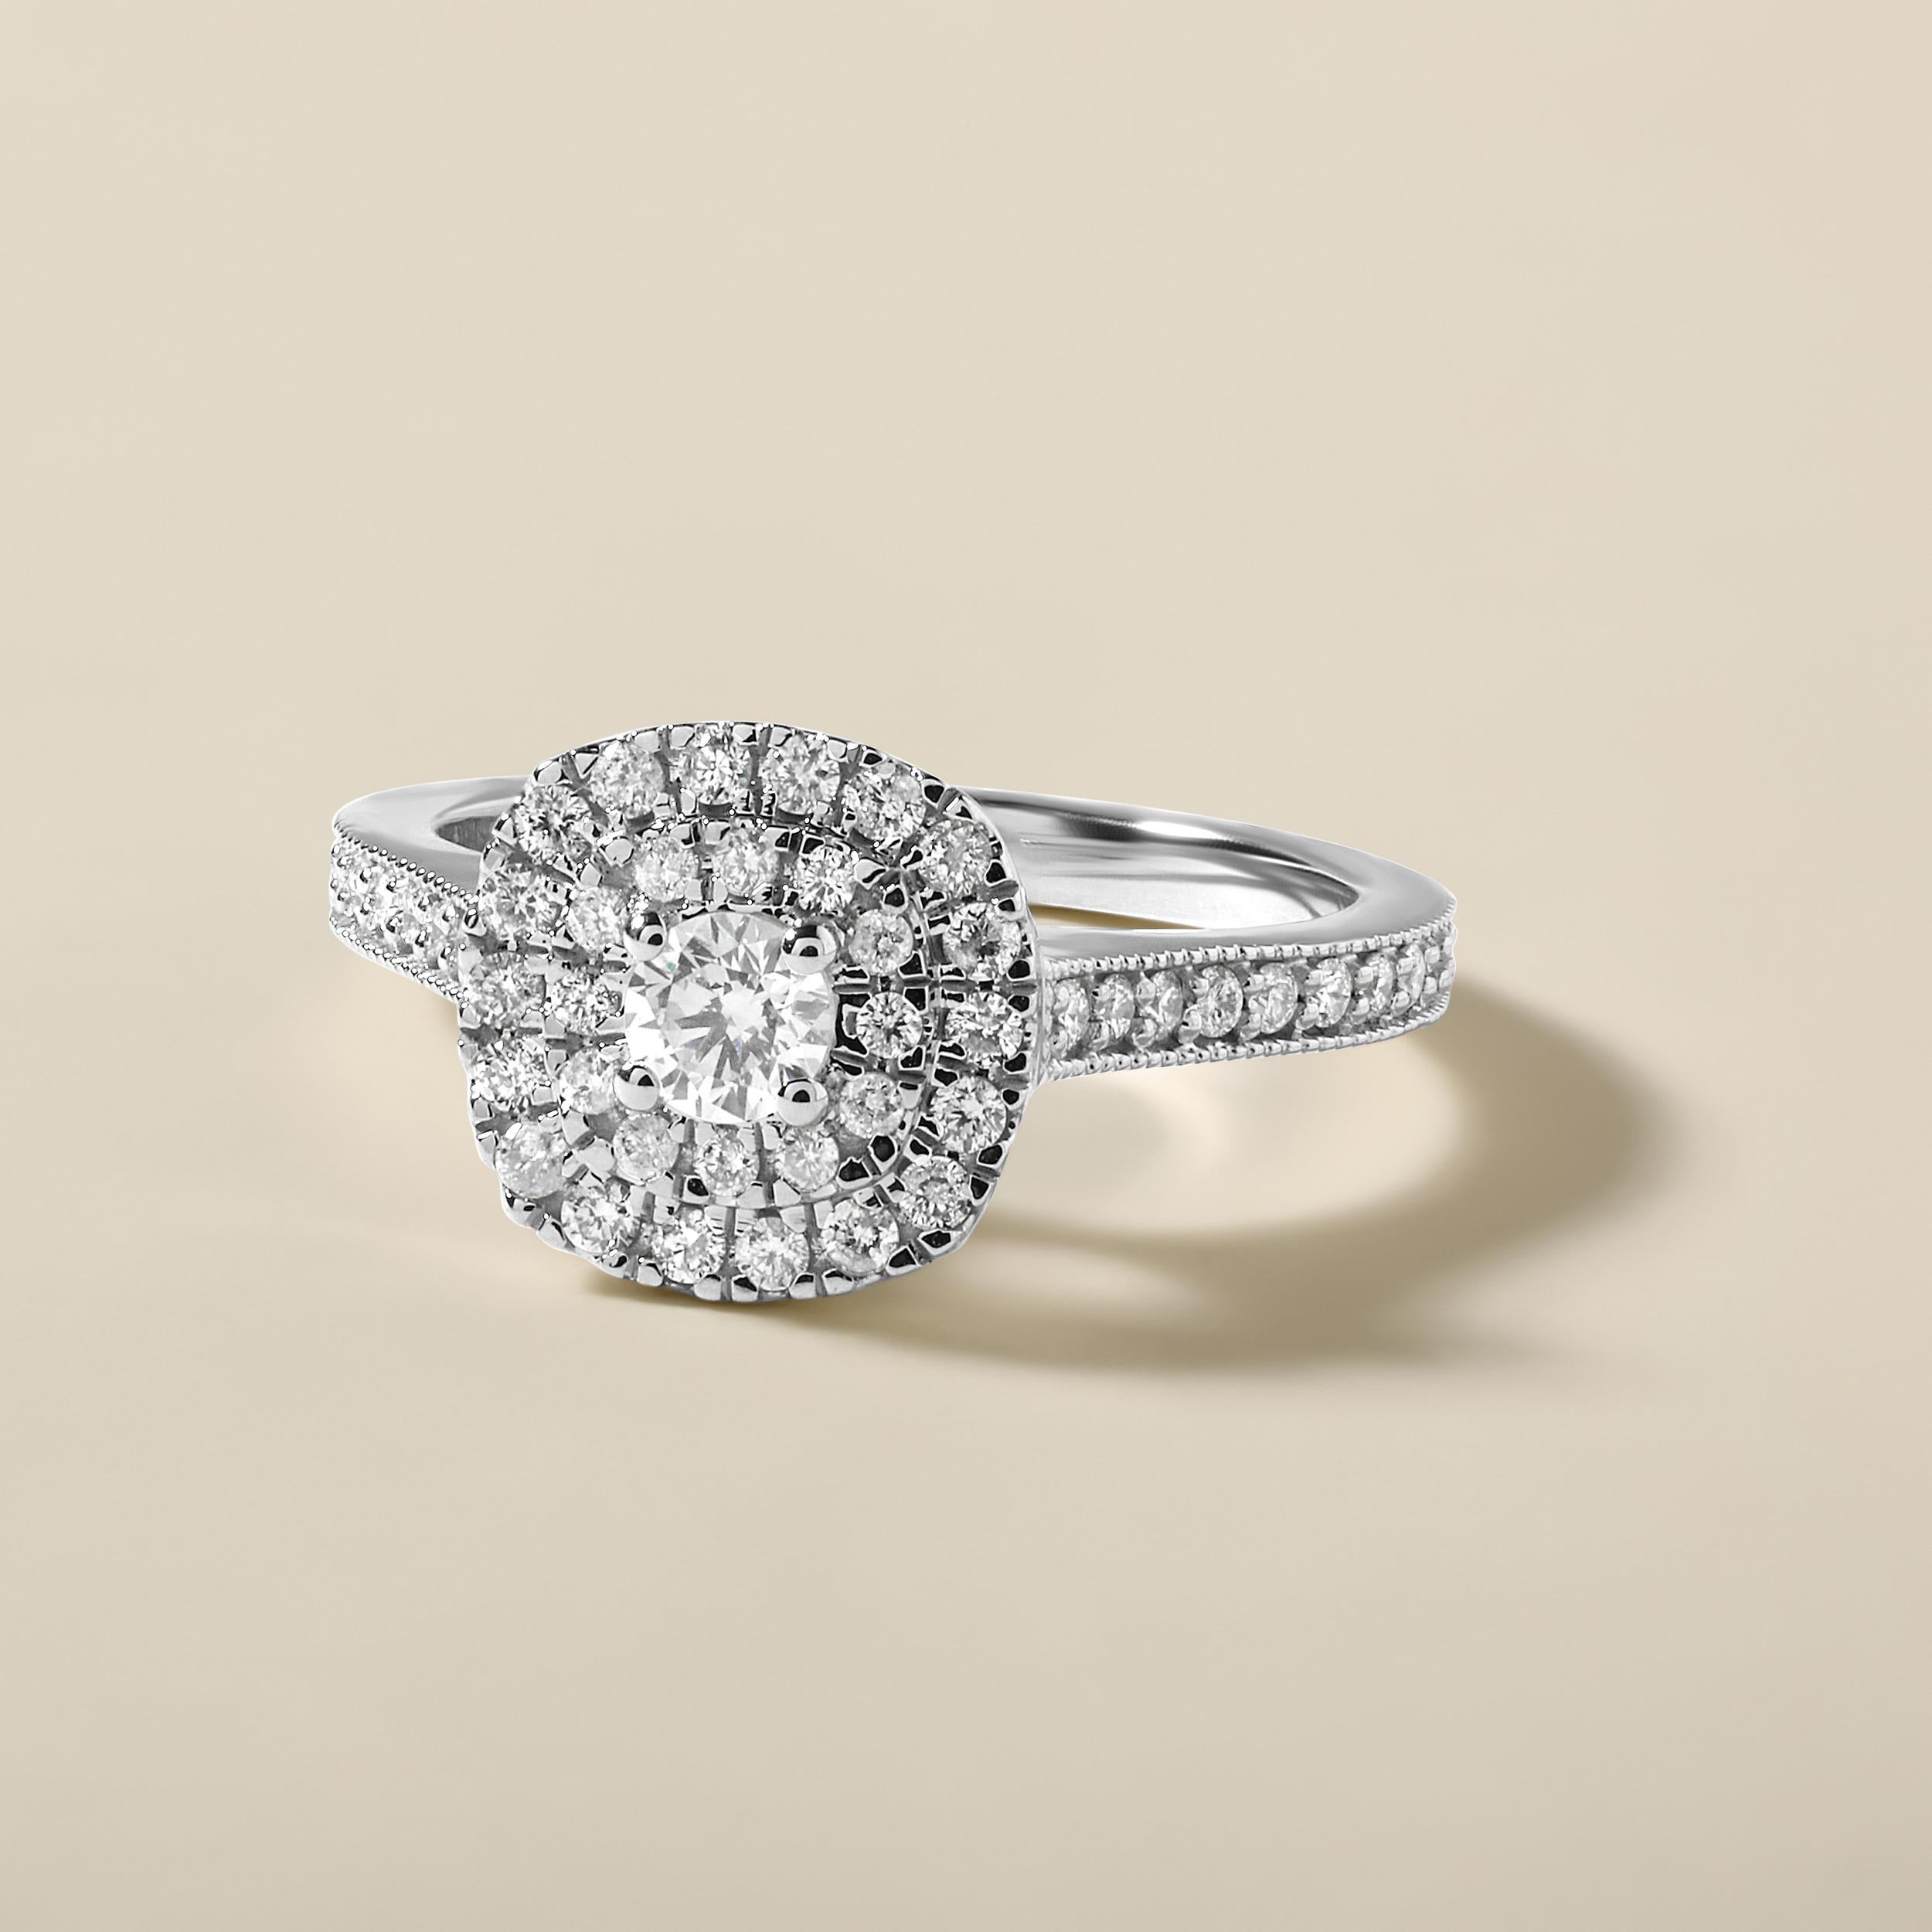 Ring Size: US 7

Crafted in 4.6 grams of 14K White Gold, the ring contains 50 stones of Round Natural Diamonds with a total of 0.55 carat in F-G color and I1-I2 clarity combined with 1 stone of Round Solitaire Natural Diamond with a total of 0.16